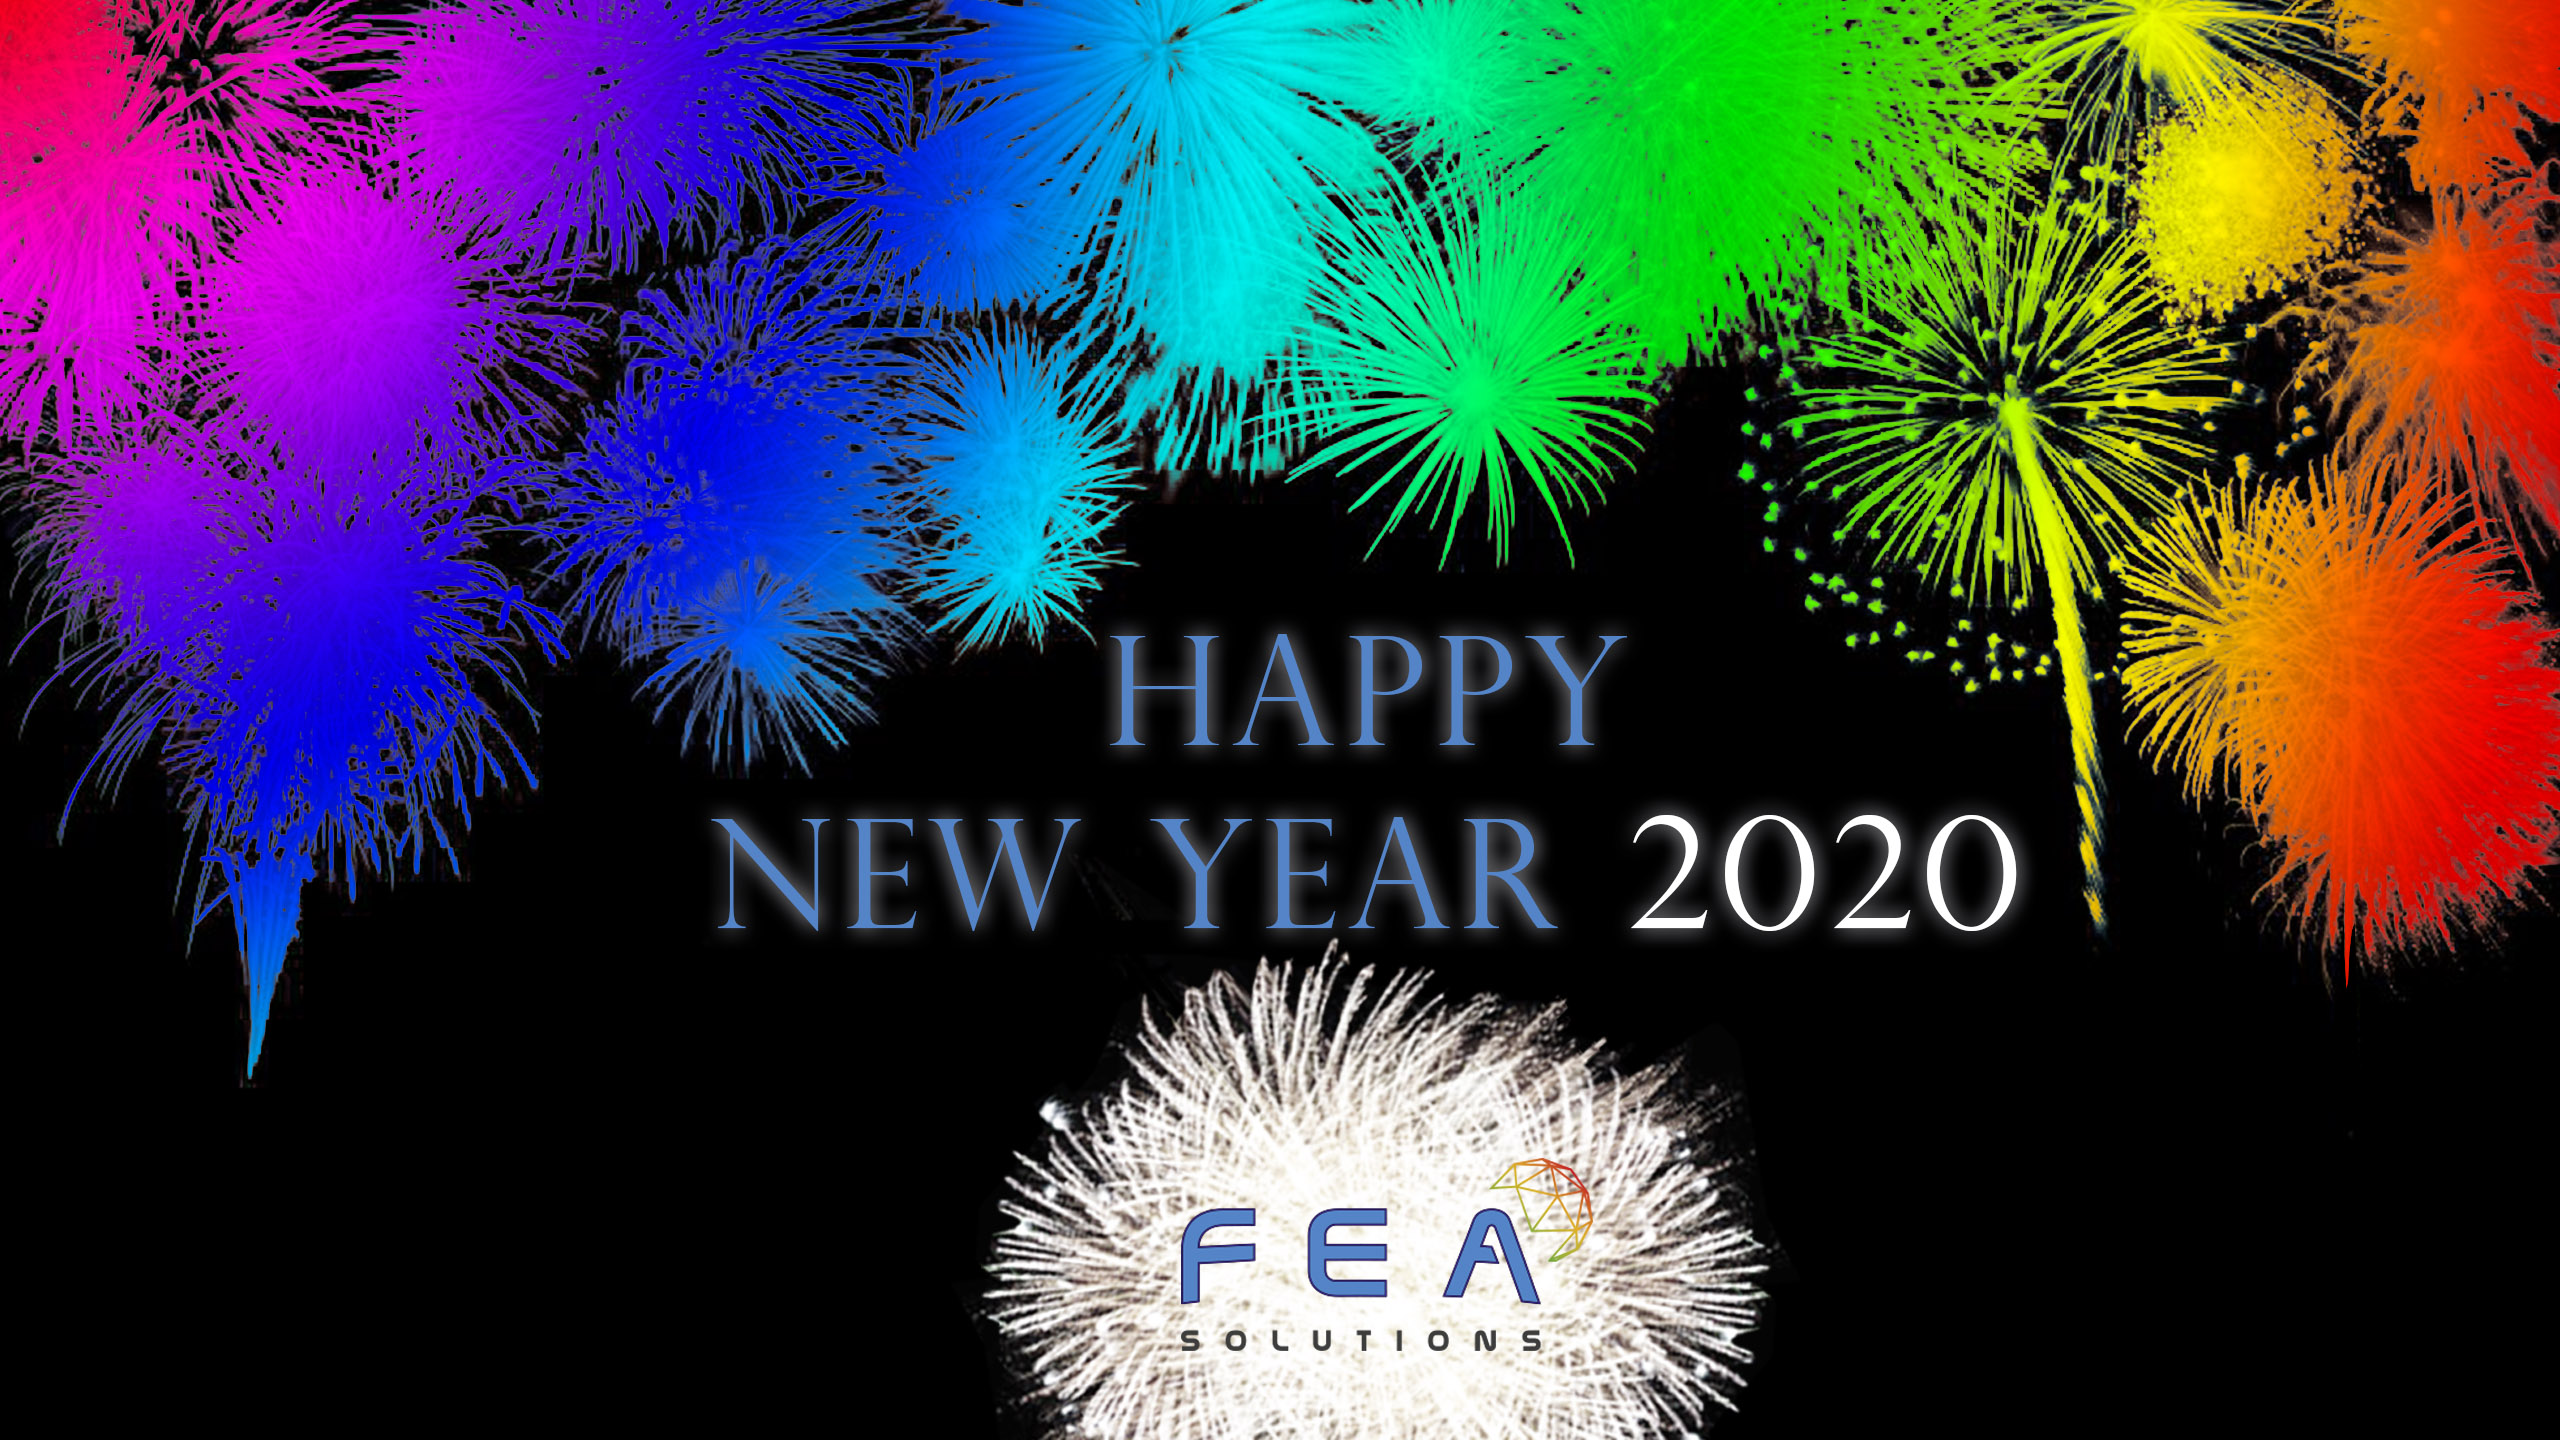 happy new year 2020 message from fea solutions